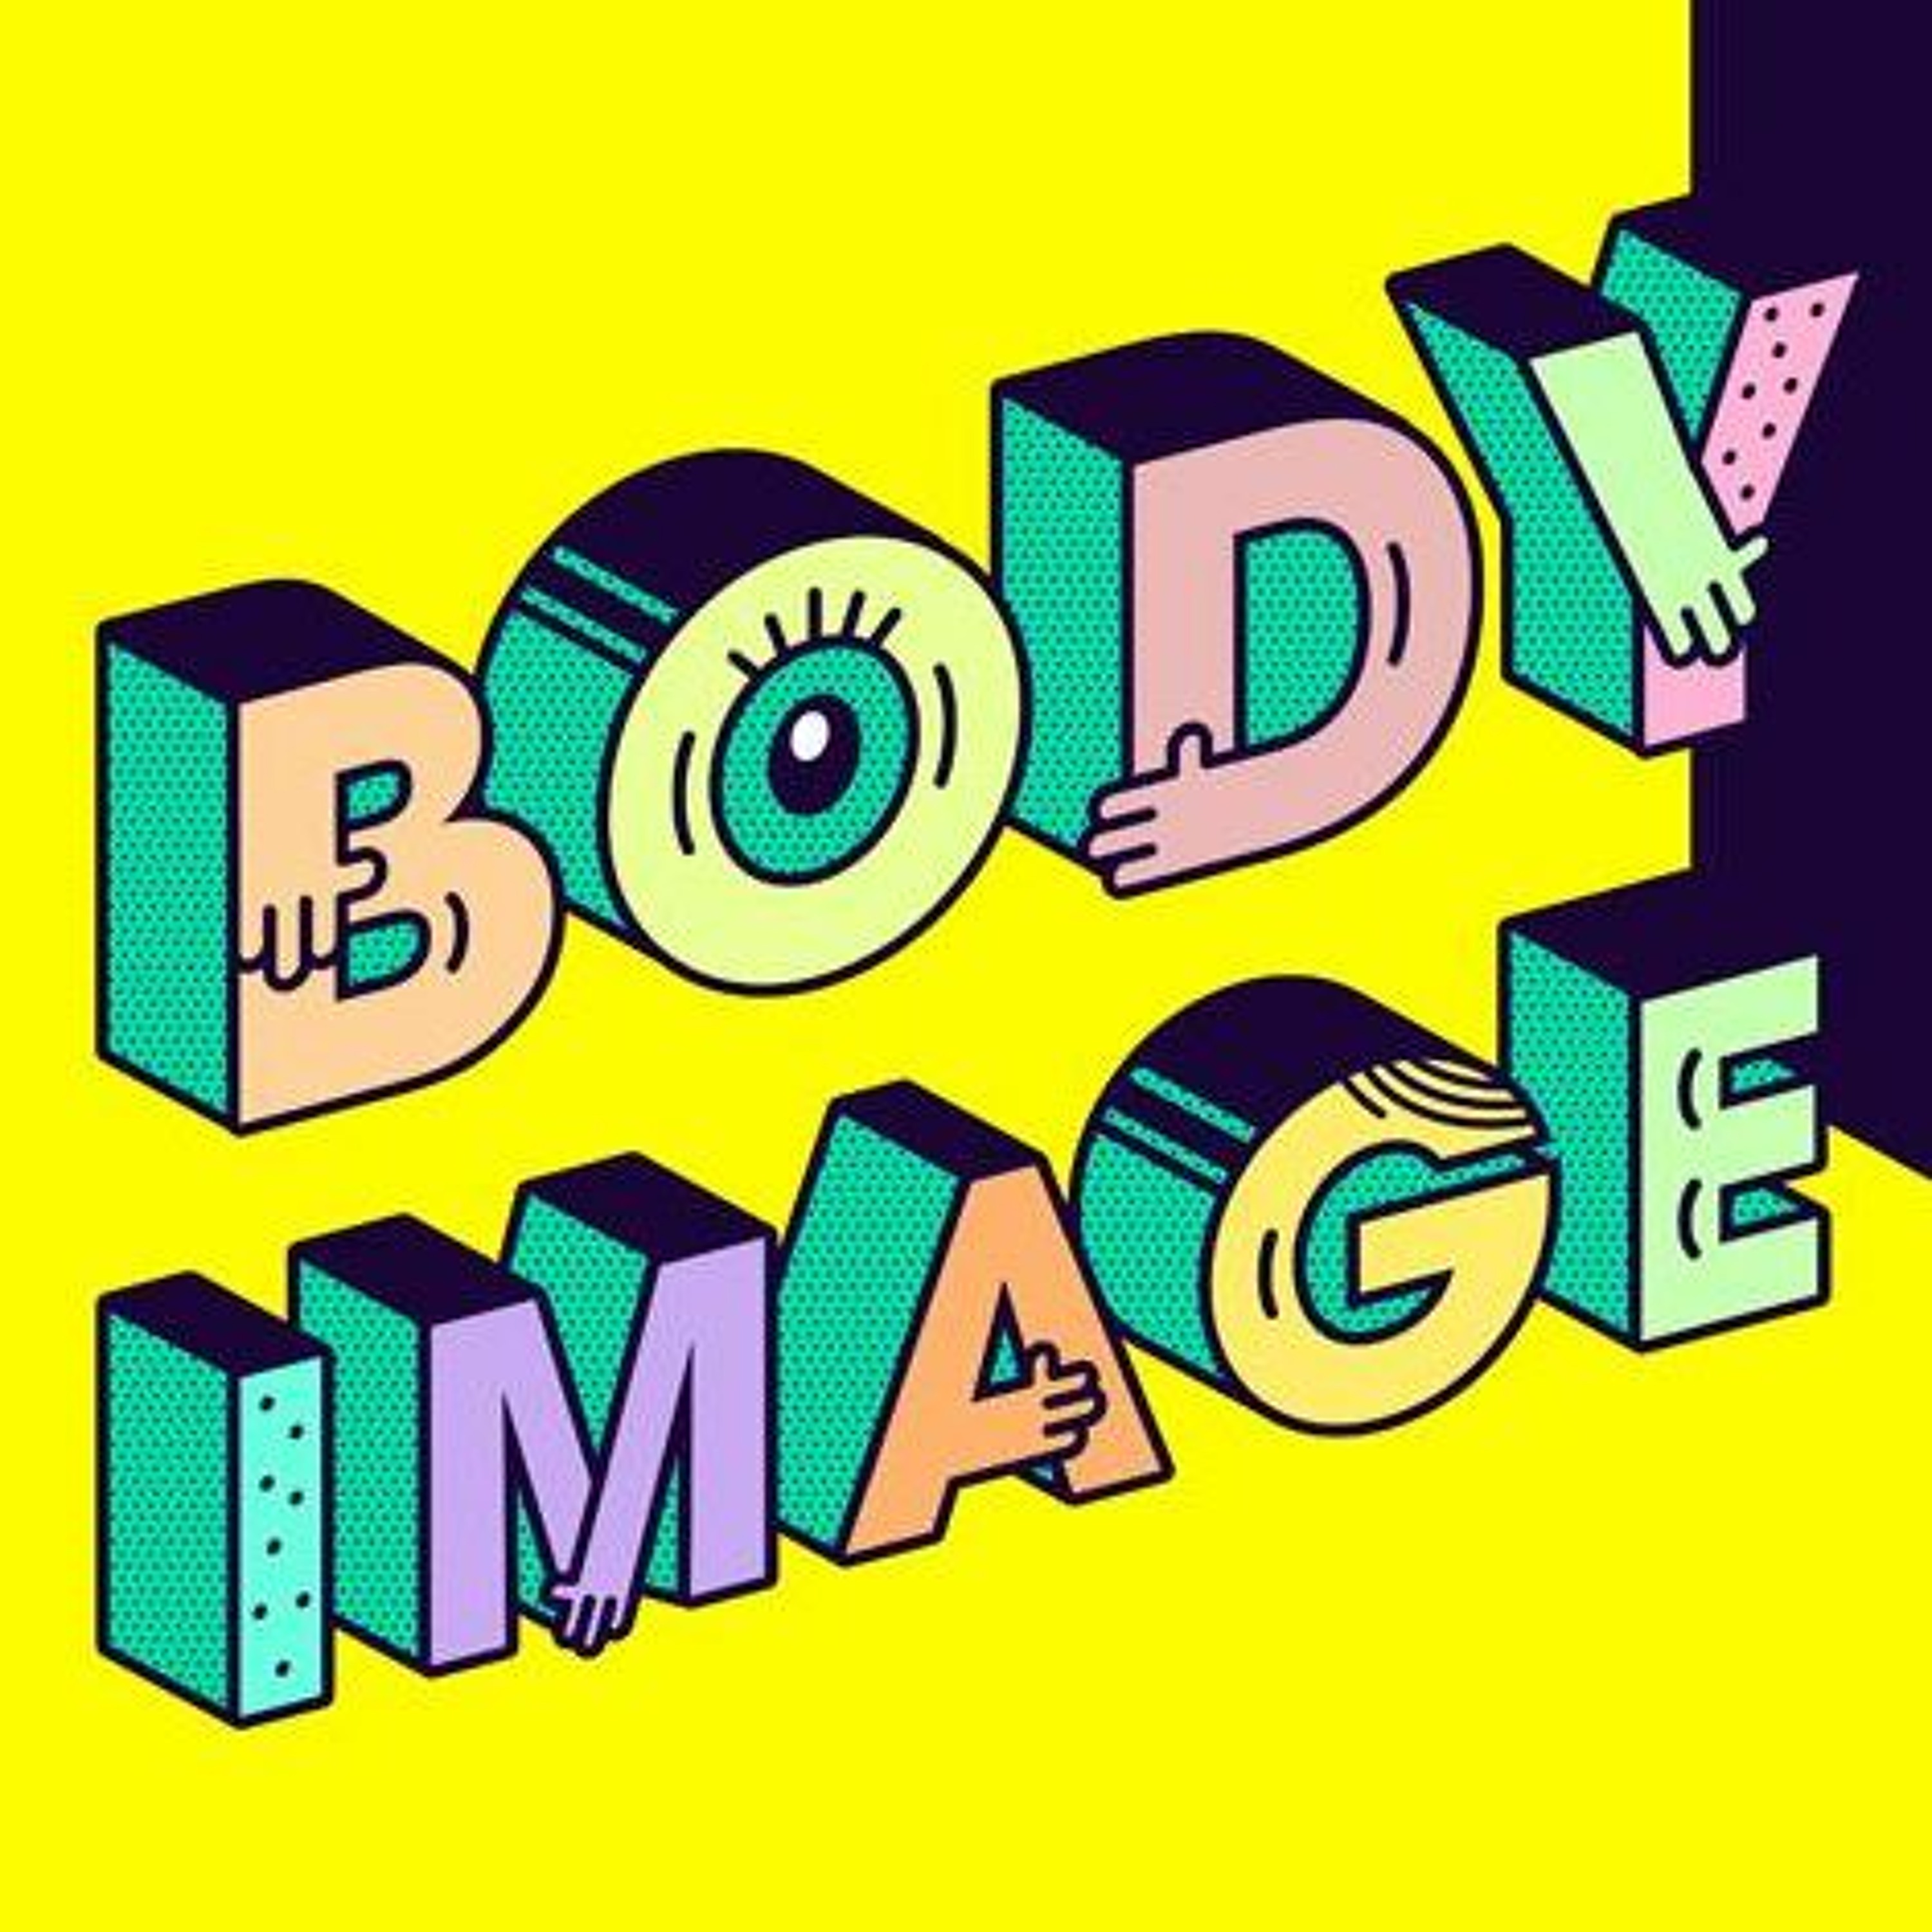 Let's Talk: Mental Health - Body image – how we think and feel about our bodies